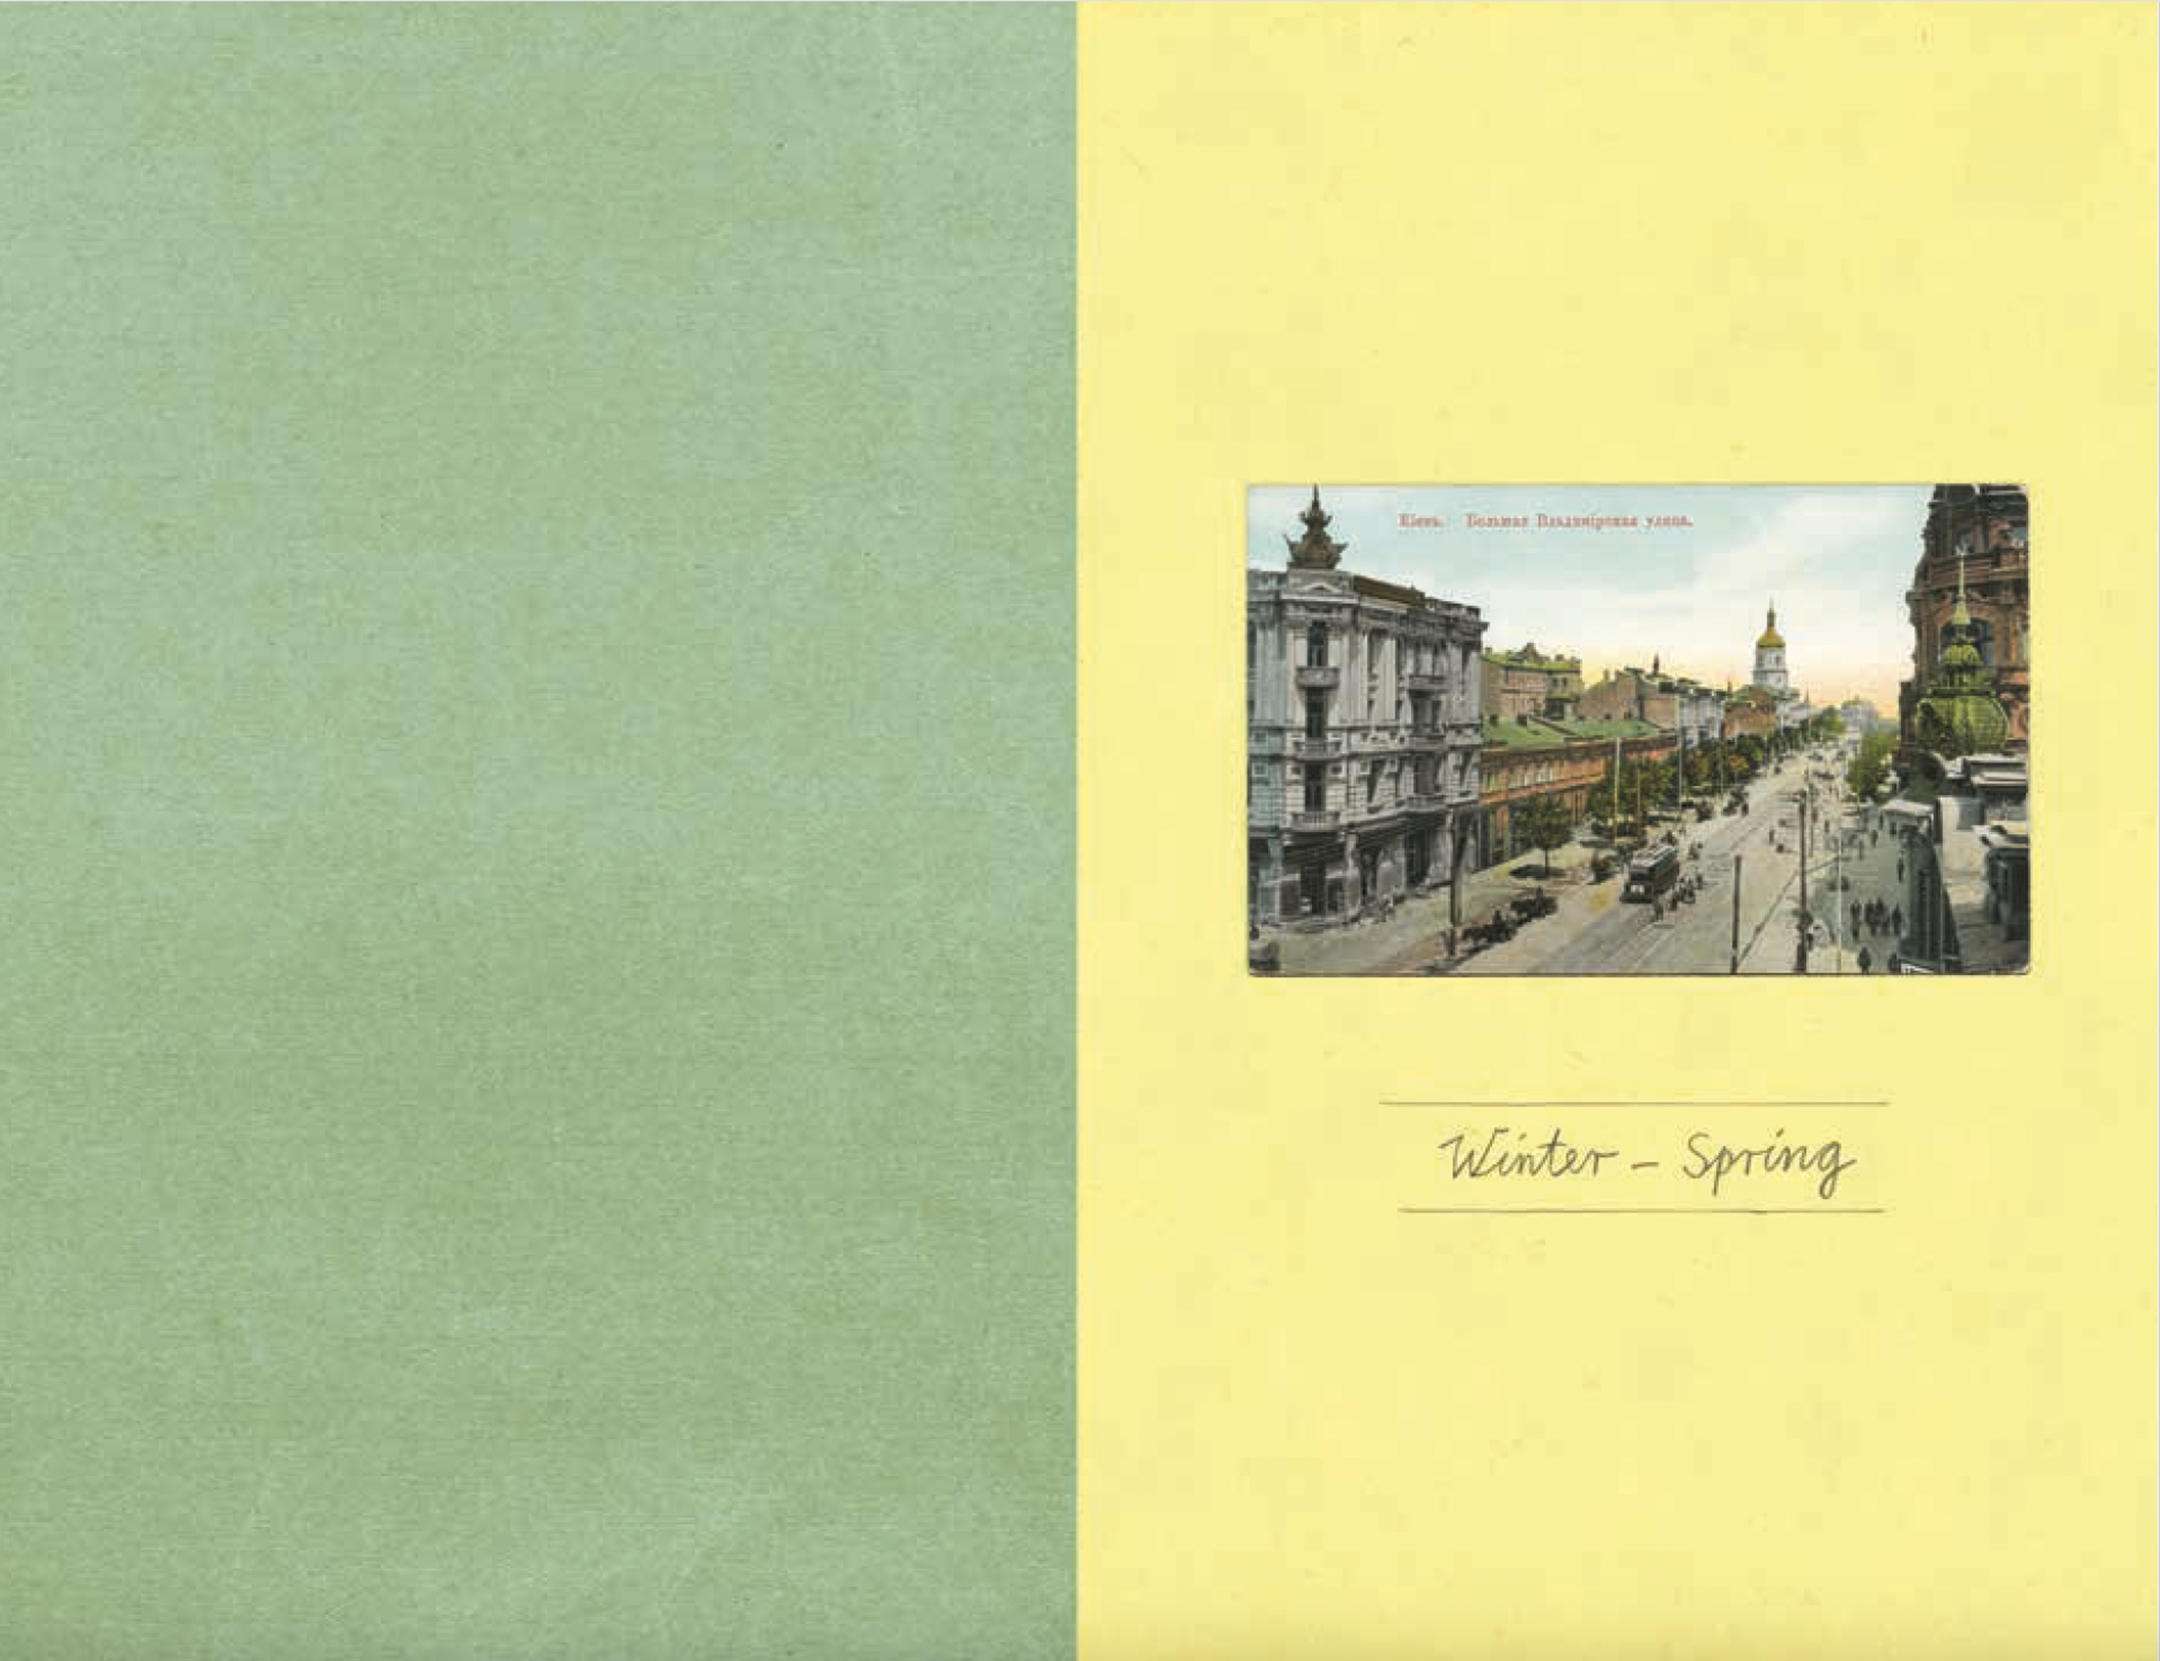 A green and yellow card with an old photo of the city.